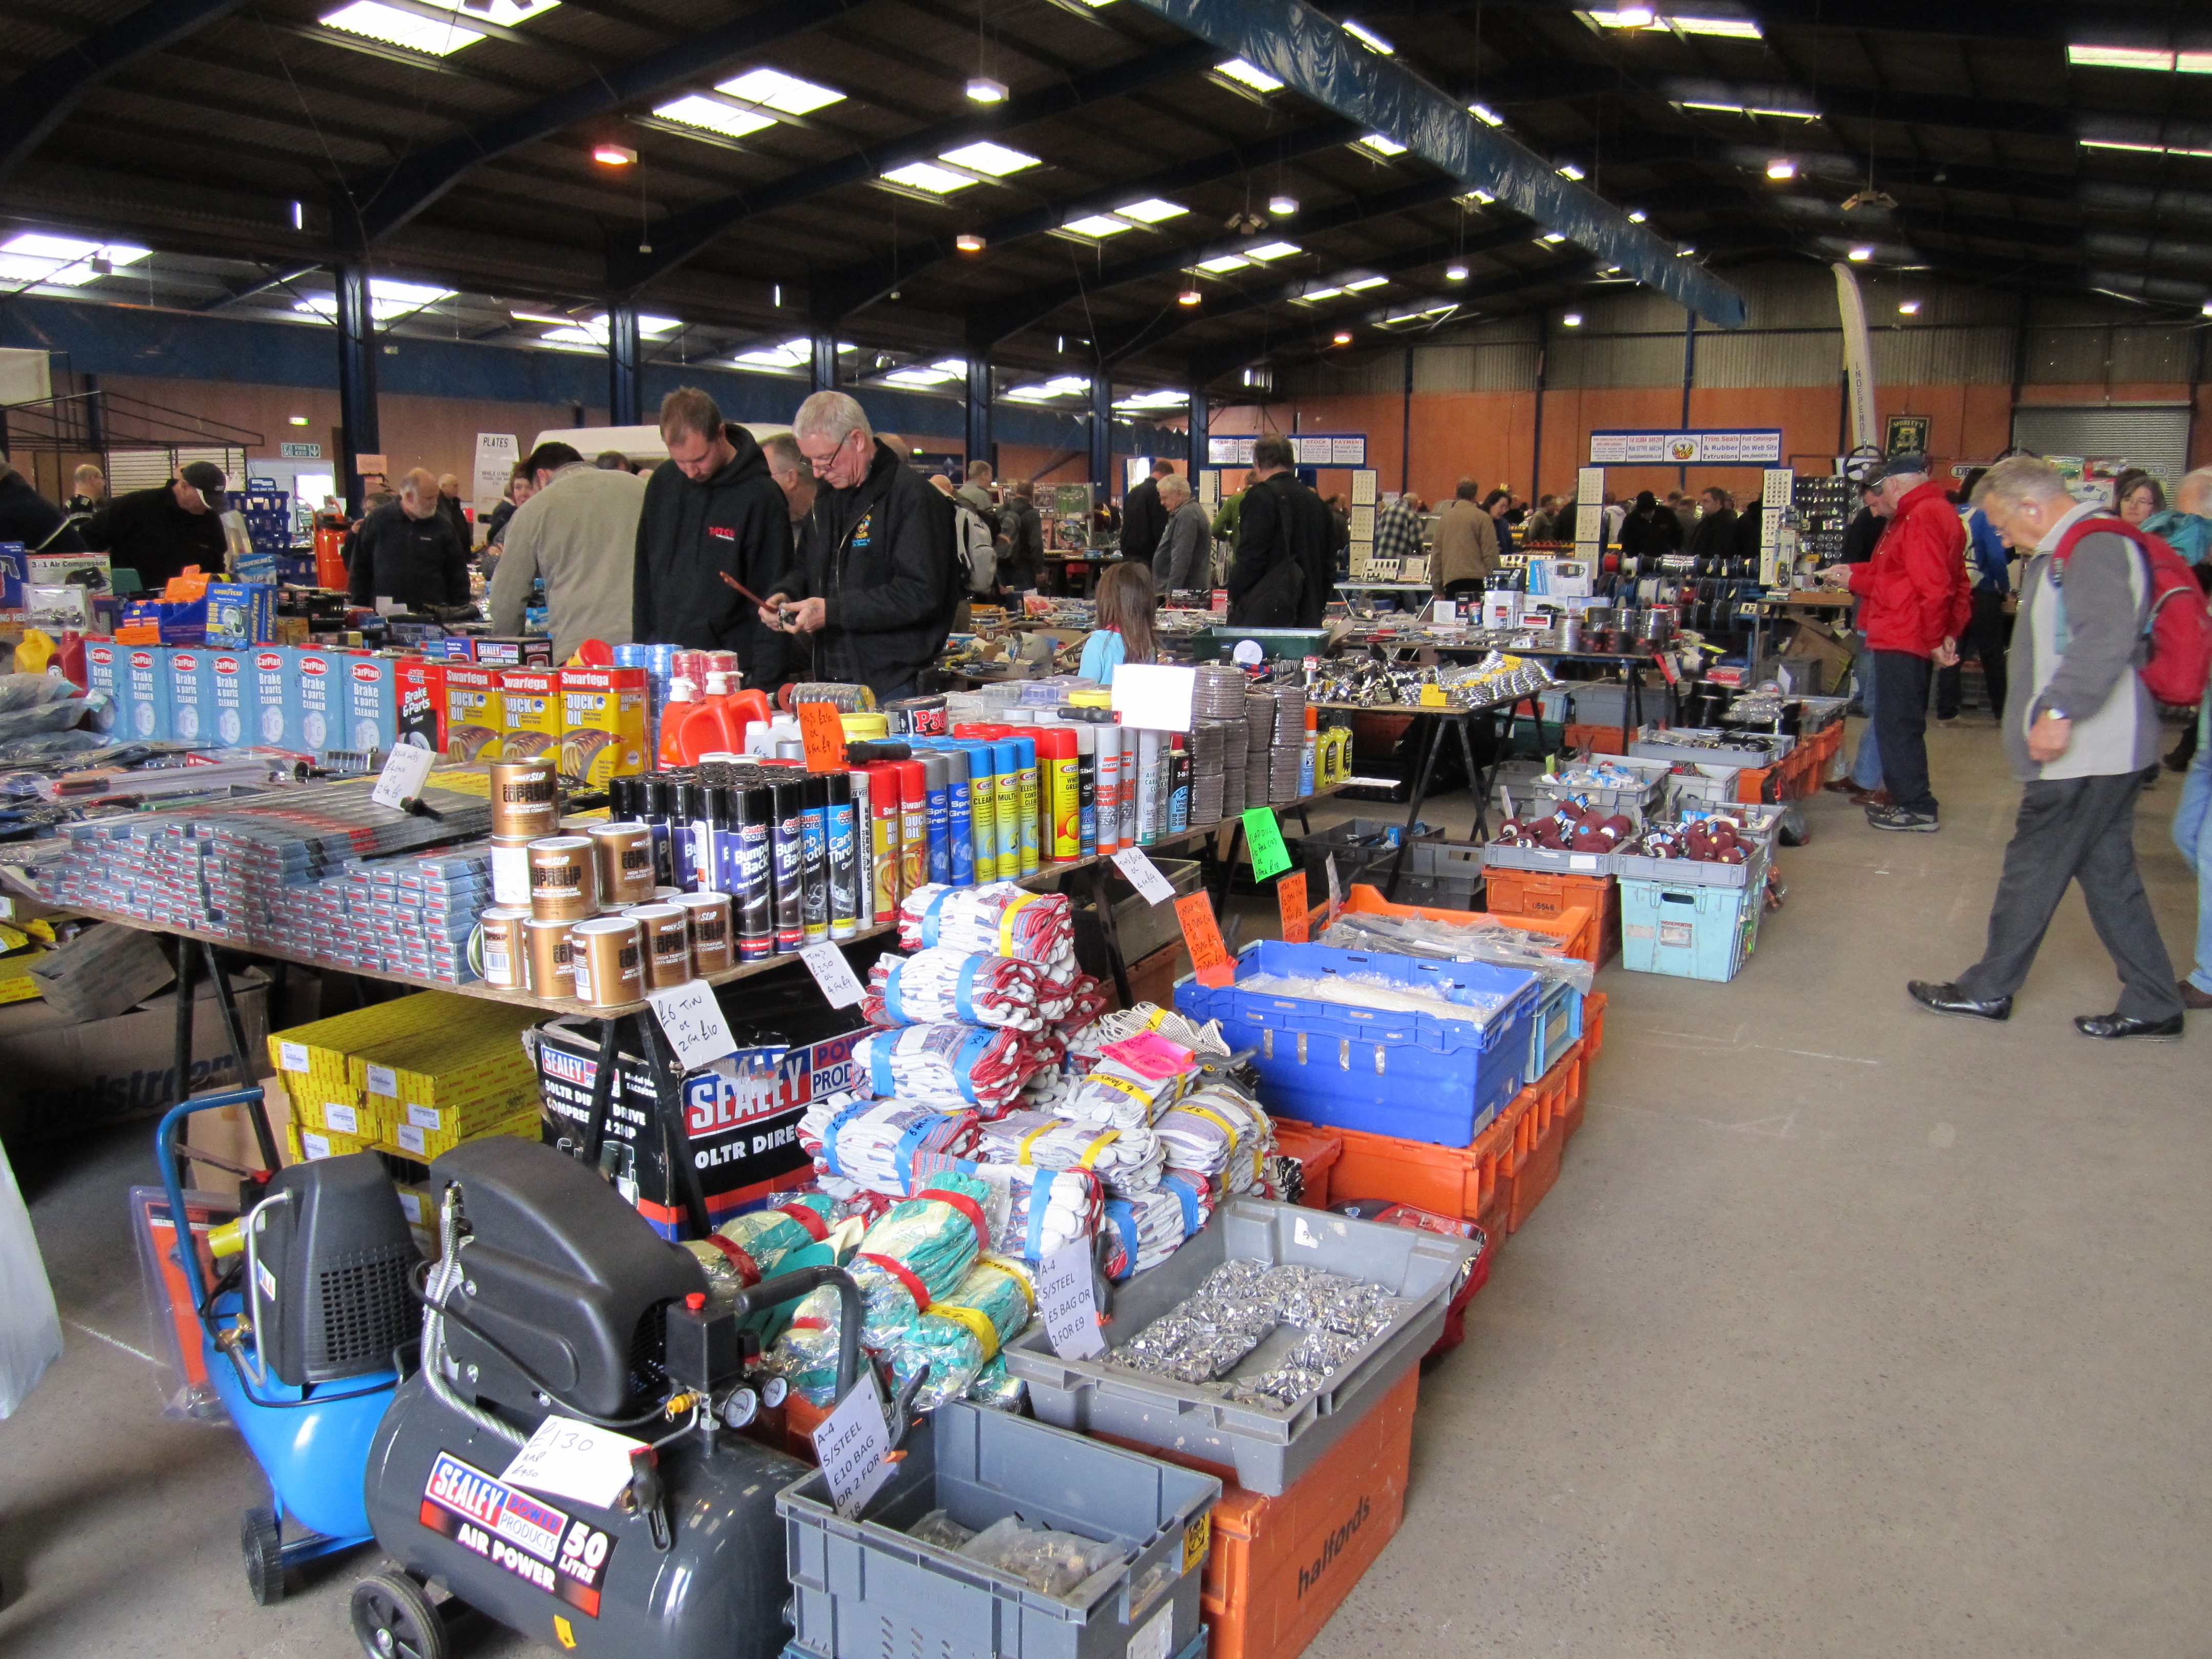 Trade stands offering bargains galore